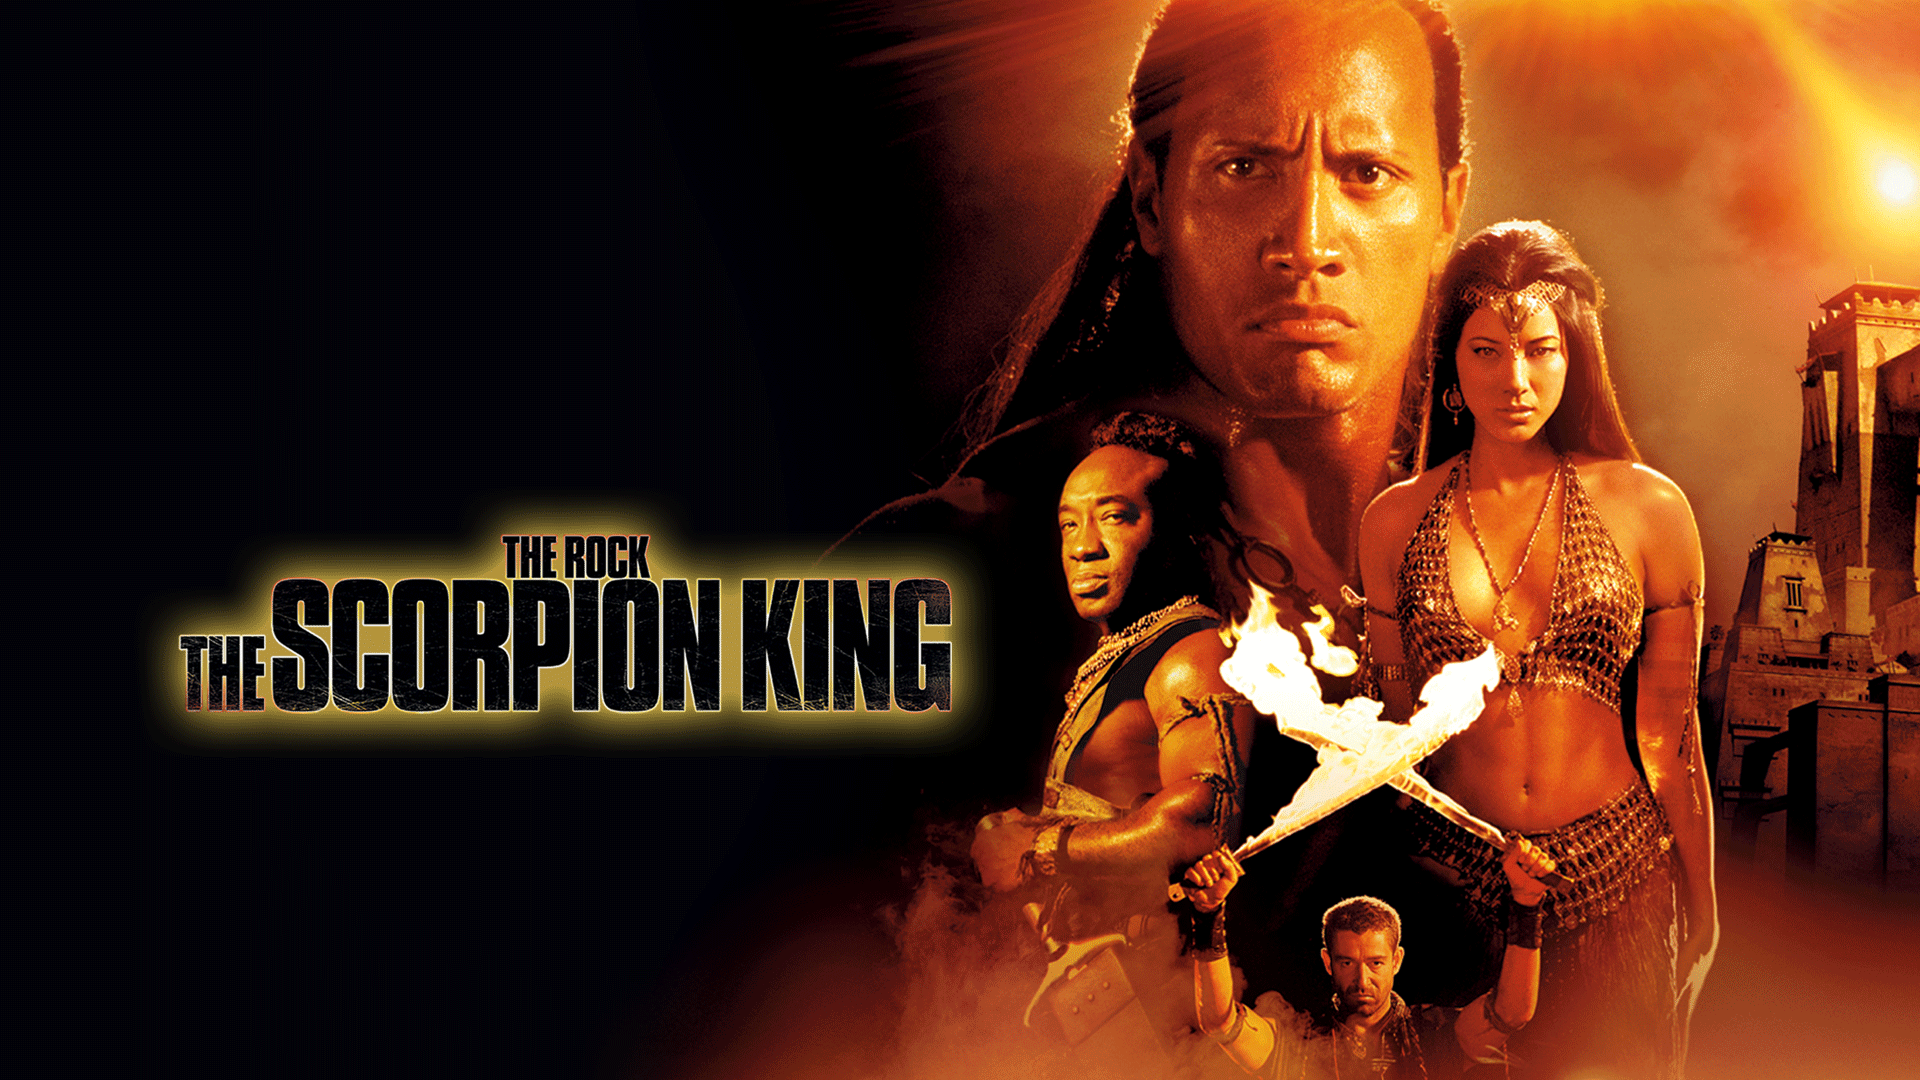 the scorpion king 2002 full movie download in tamil